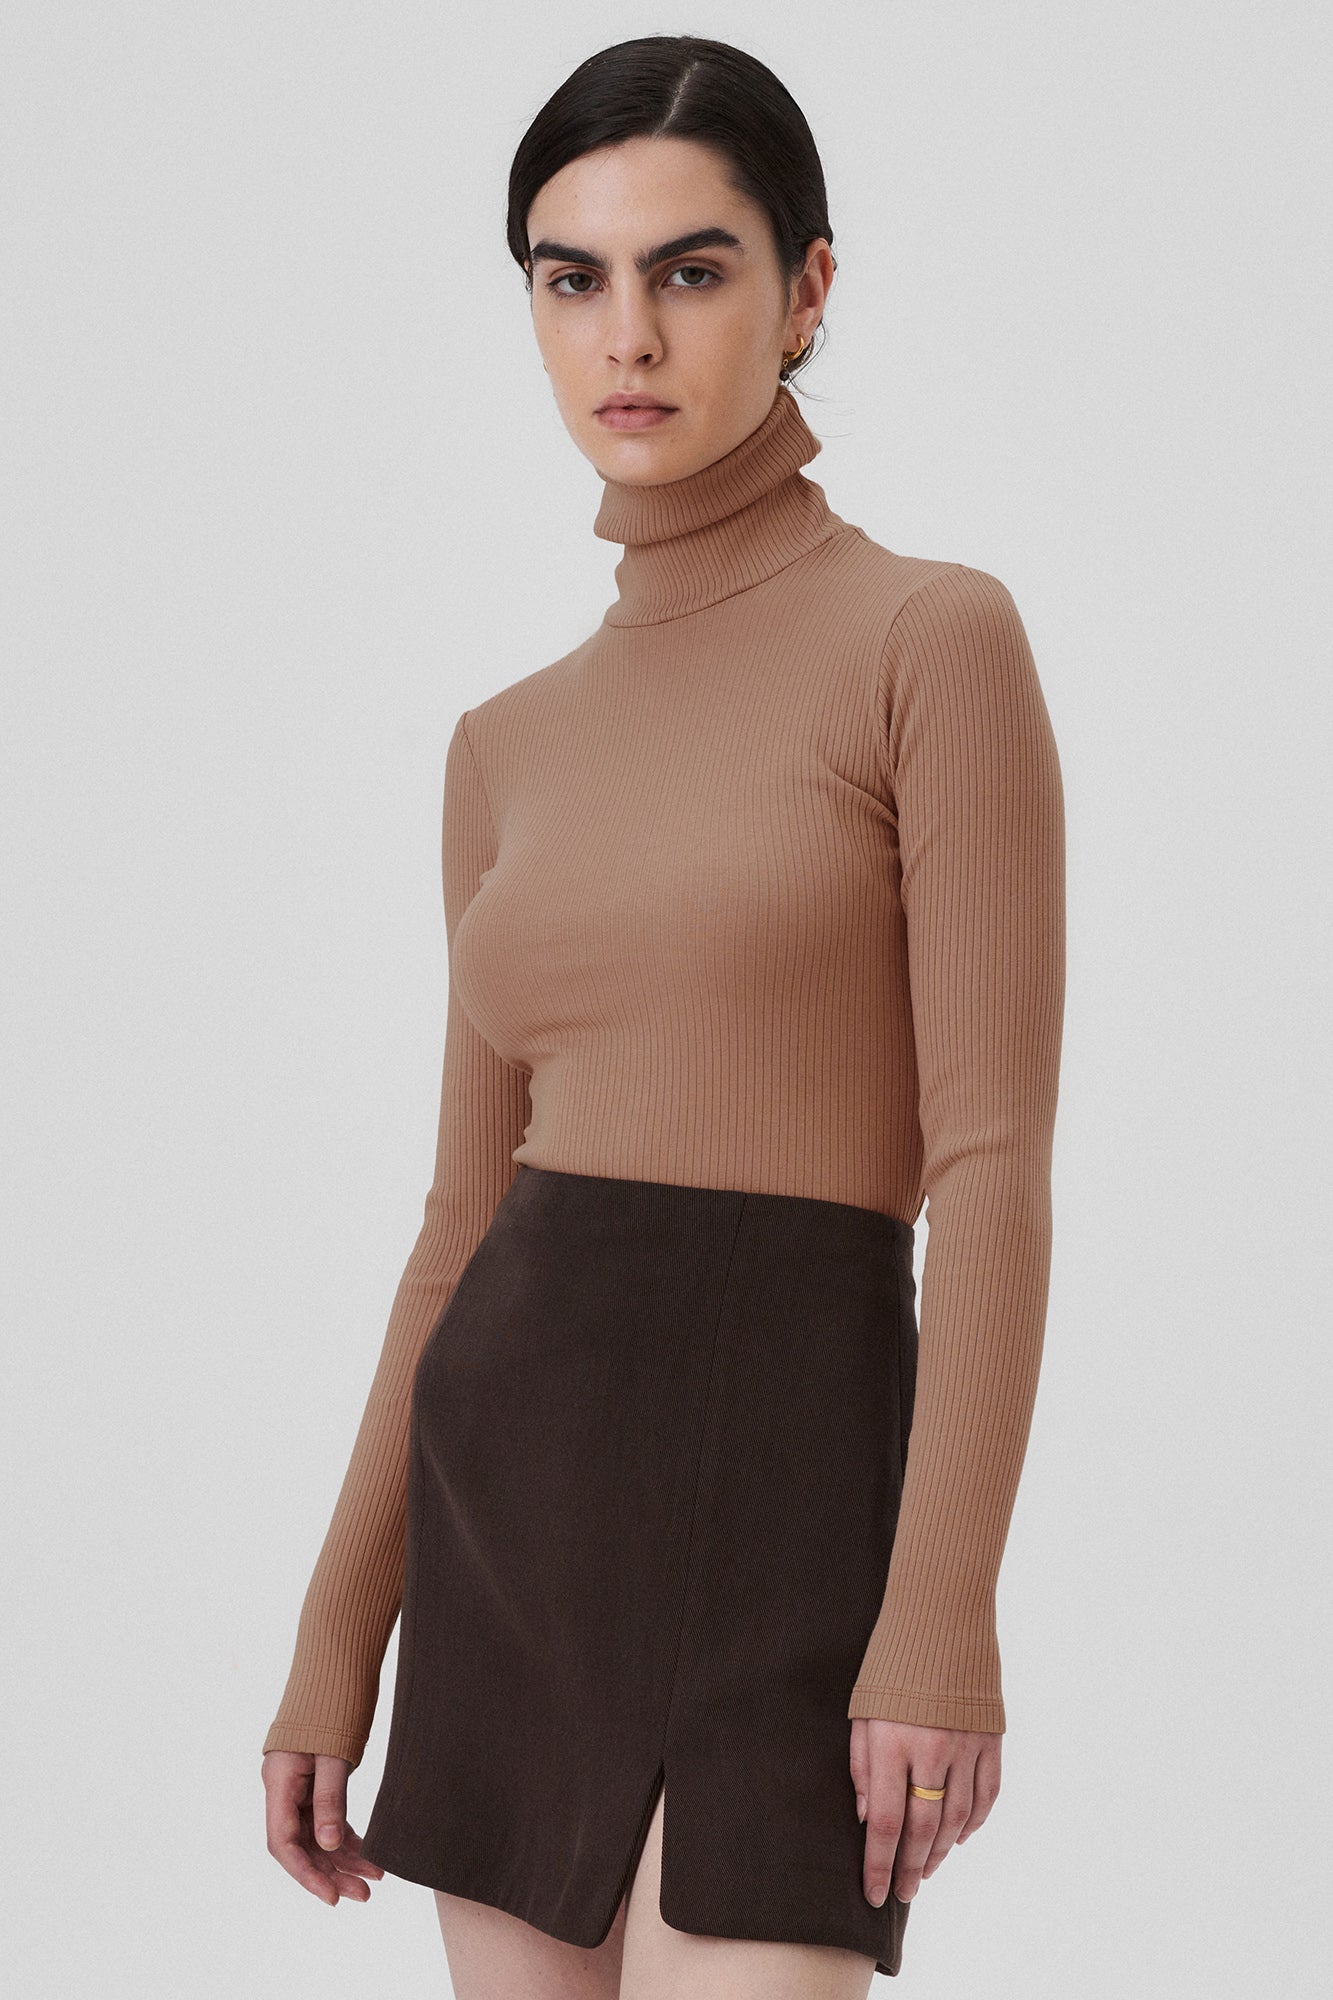 Tencel™ skirt / 07 / 02 / dark chocolate *turtleneck-in-organic-cotton-15-02-coffee-cream* ?The model is 172cm tall and wears size XS? |